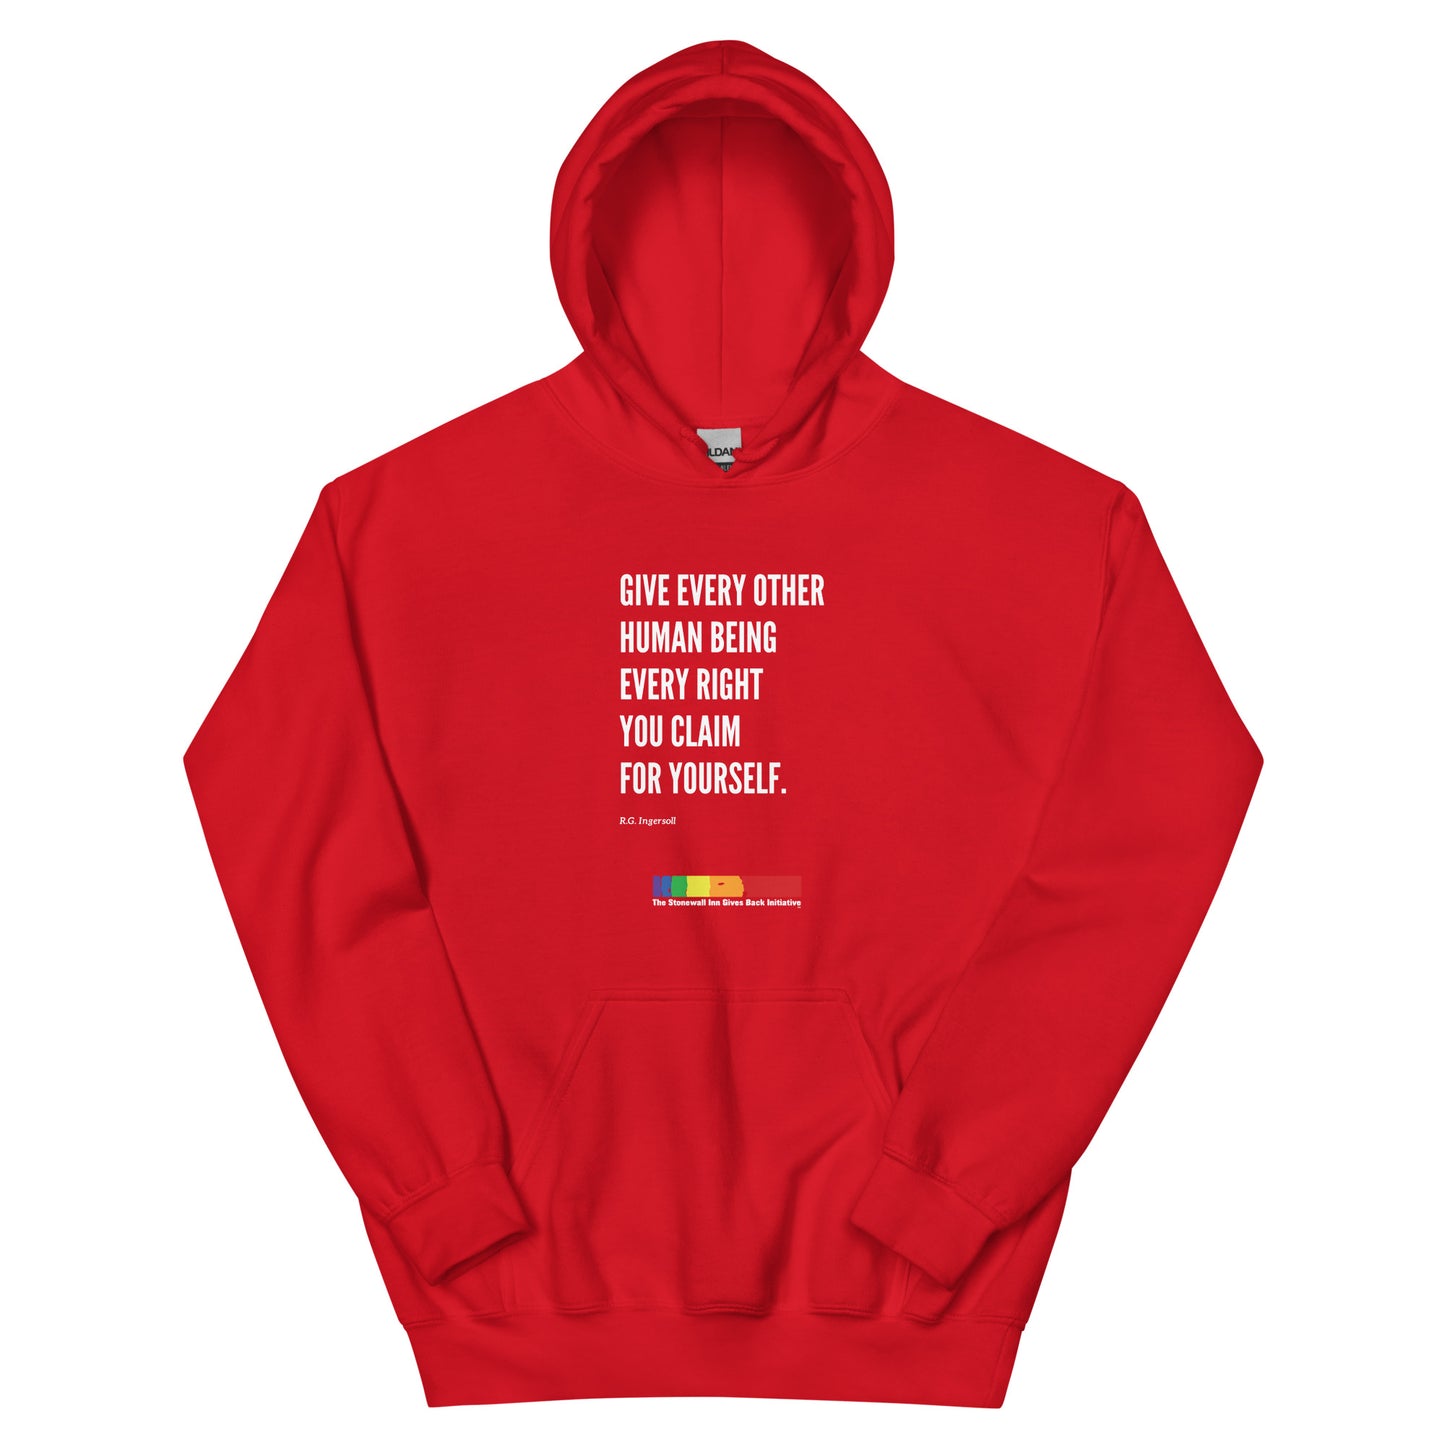 "Give Every Other Human Being Every Right You Claim For Yourself" LGBTQ+ Support Hoodie in Red